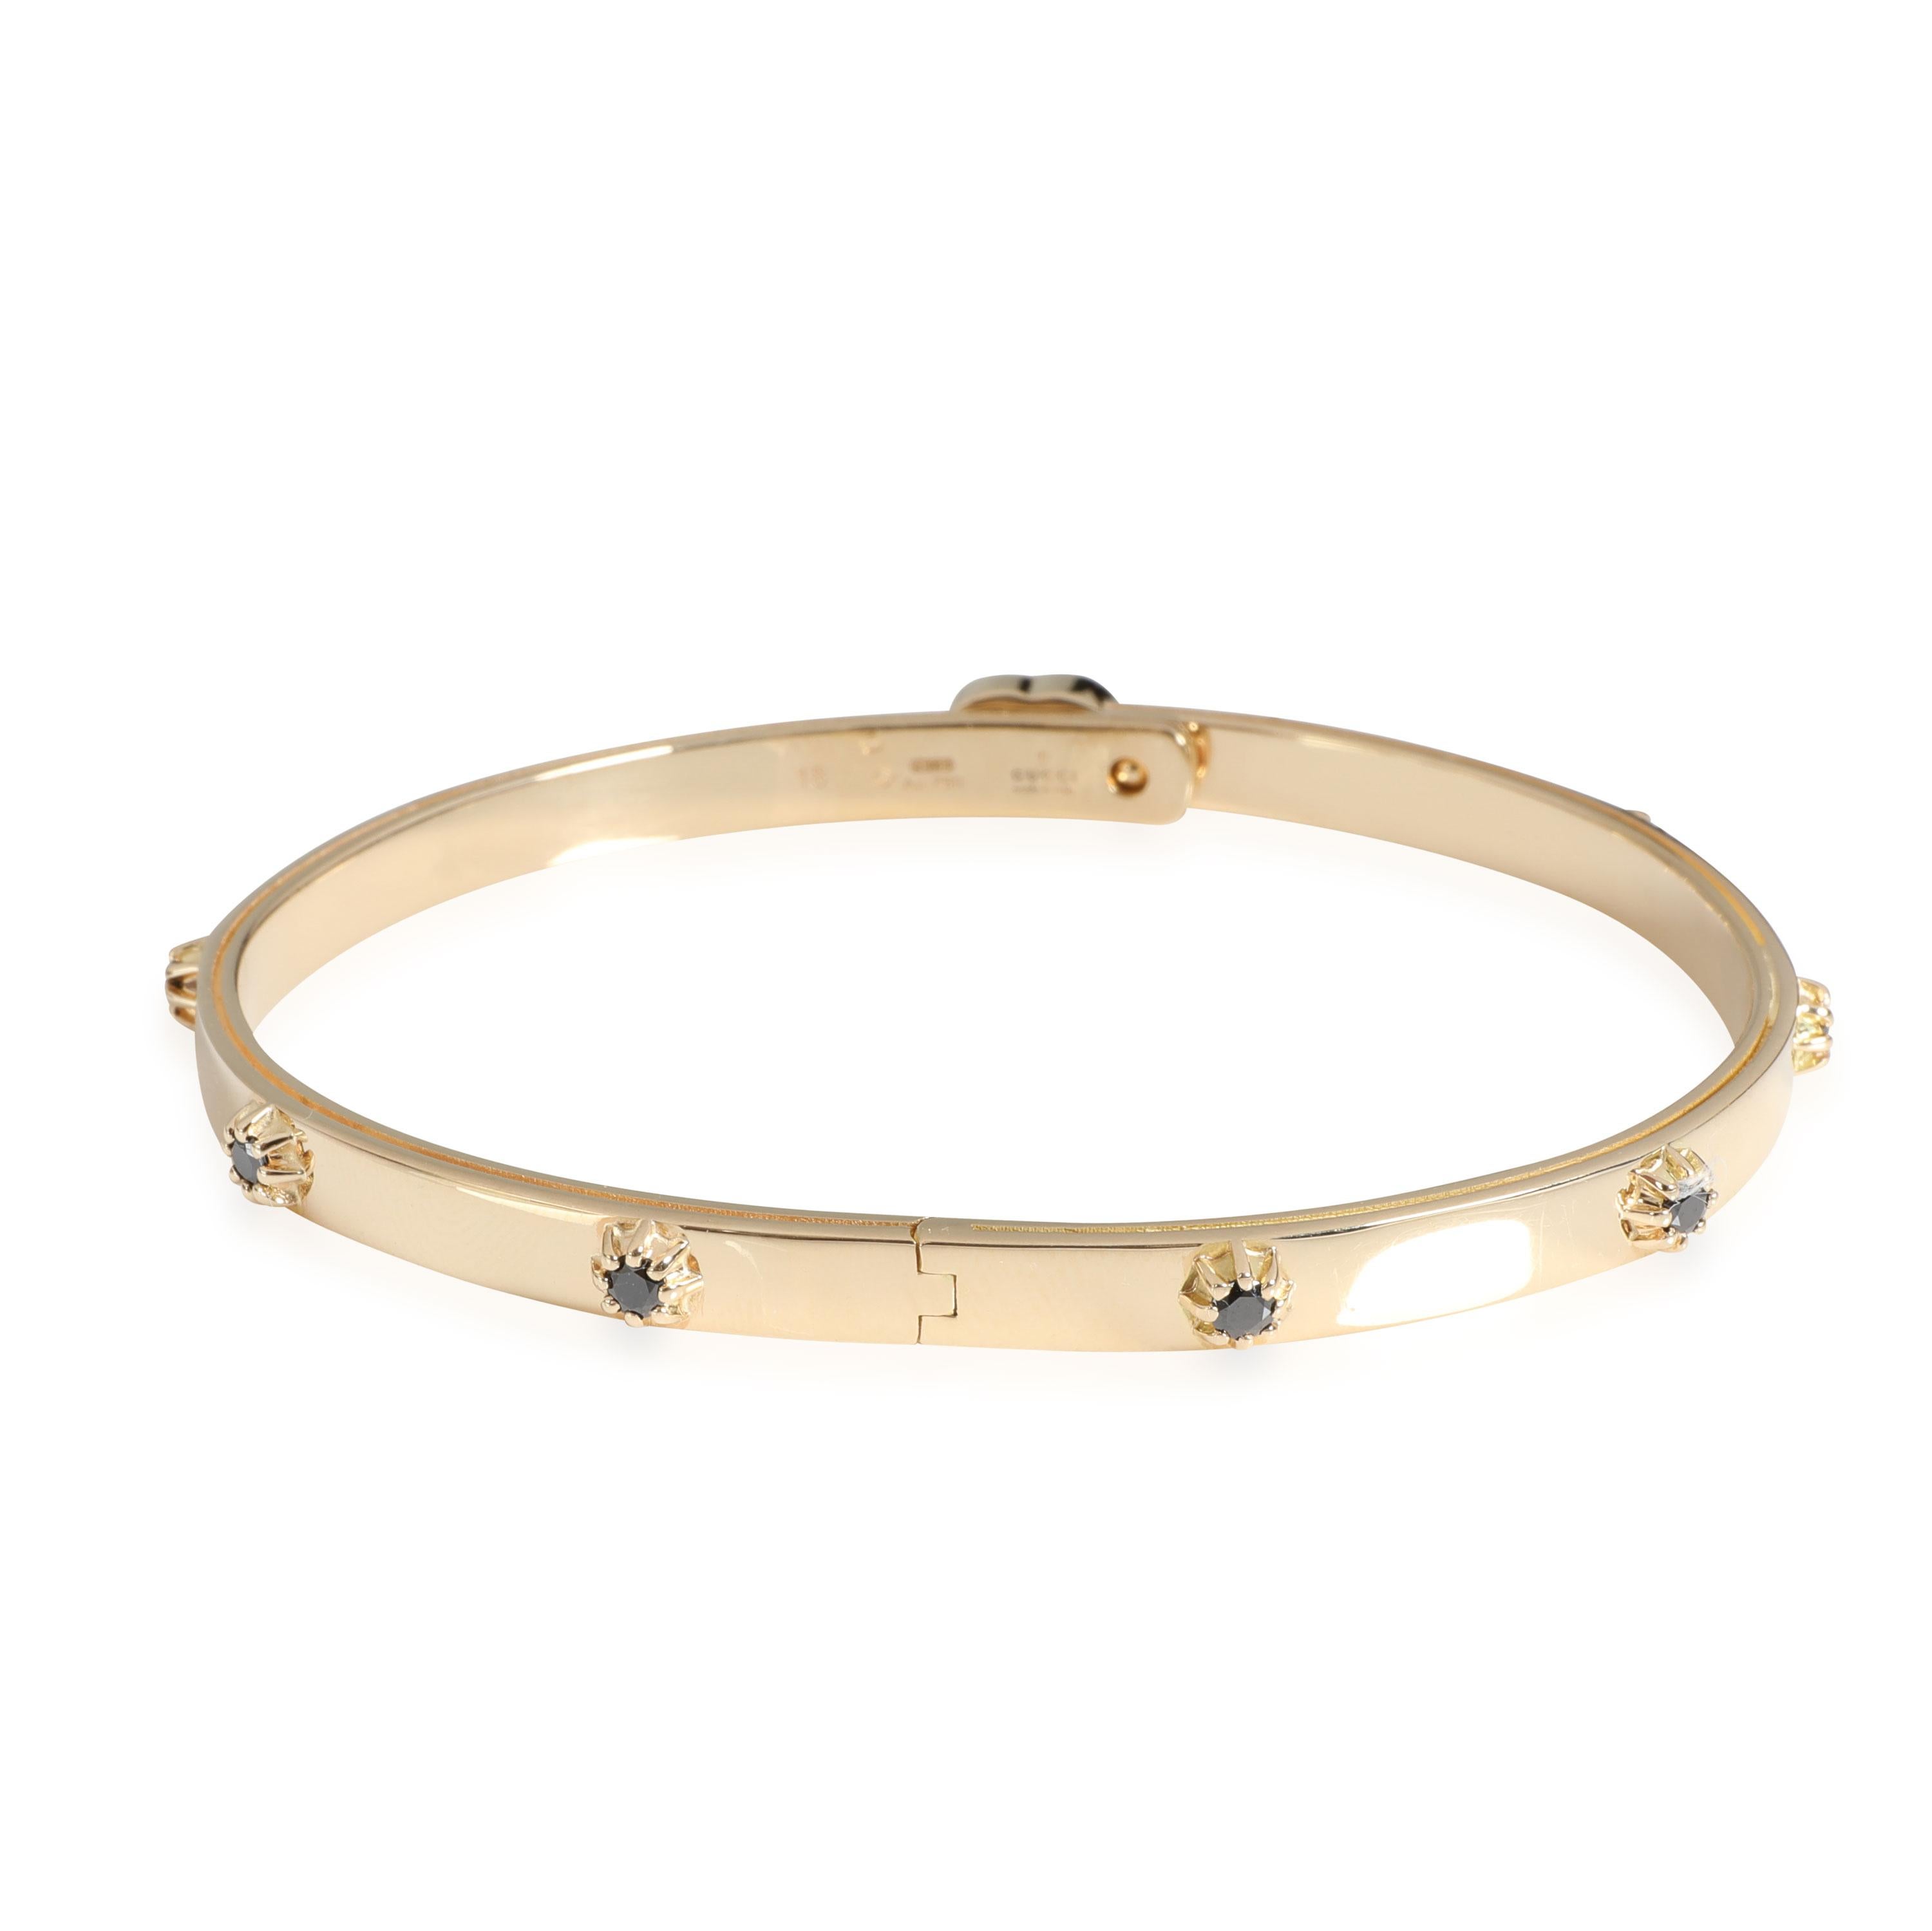 Gucci  Diamond Bangle in 18k Yellow Gold 0.35 CTW

PRIMARY DETAILS
SKU: 117357
Listing Title: Gucci  Diamond Bangle in 18k Yellow Gold 0.35 CTW
Condition Description: Retails for 4750 USD. In excellent condition and recently polished. Chain is 18